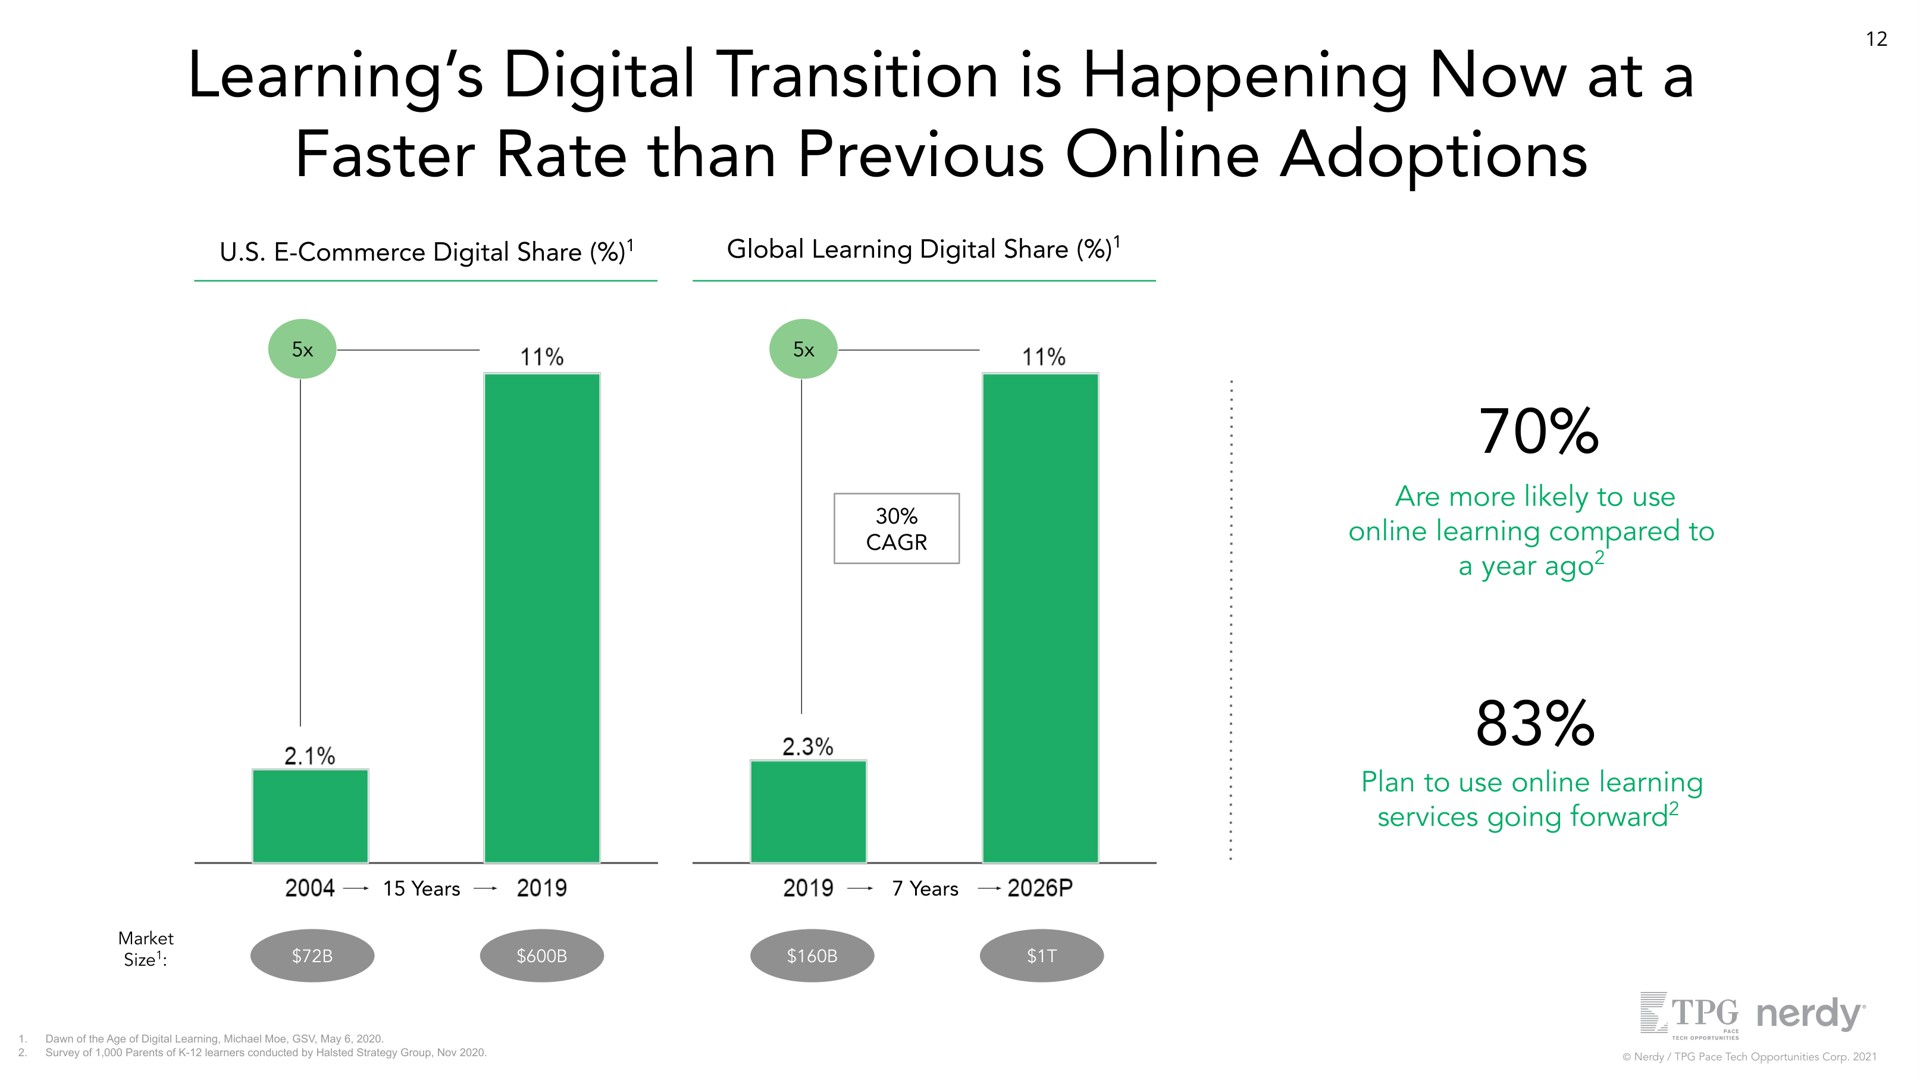 learning digital transition is happening now at a faster rate than previous adoptions commerce digital share global learning digital share are more likely to use learning compared to a year ago plan to use learning services going forward years years | Nerdy